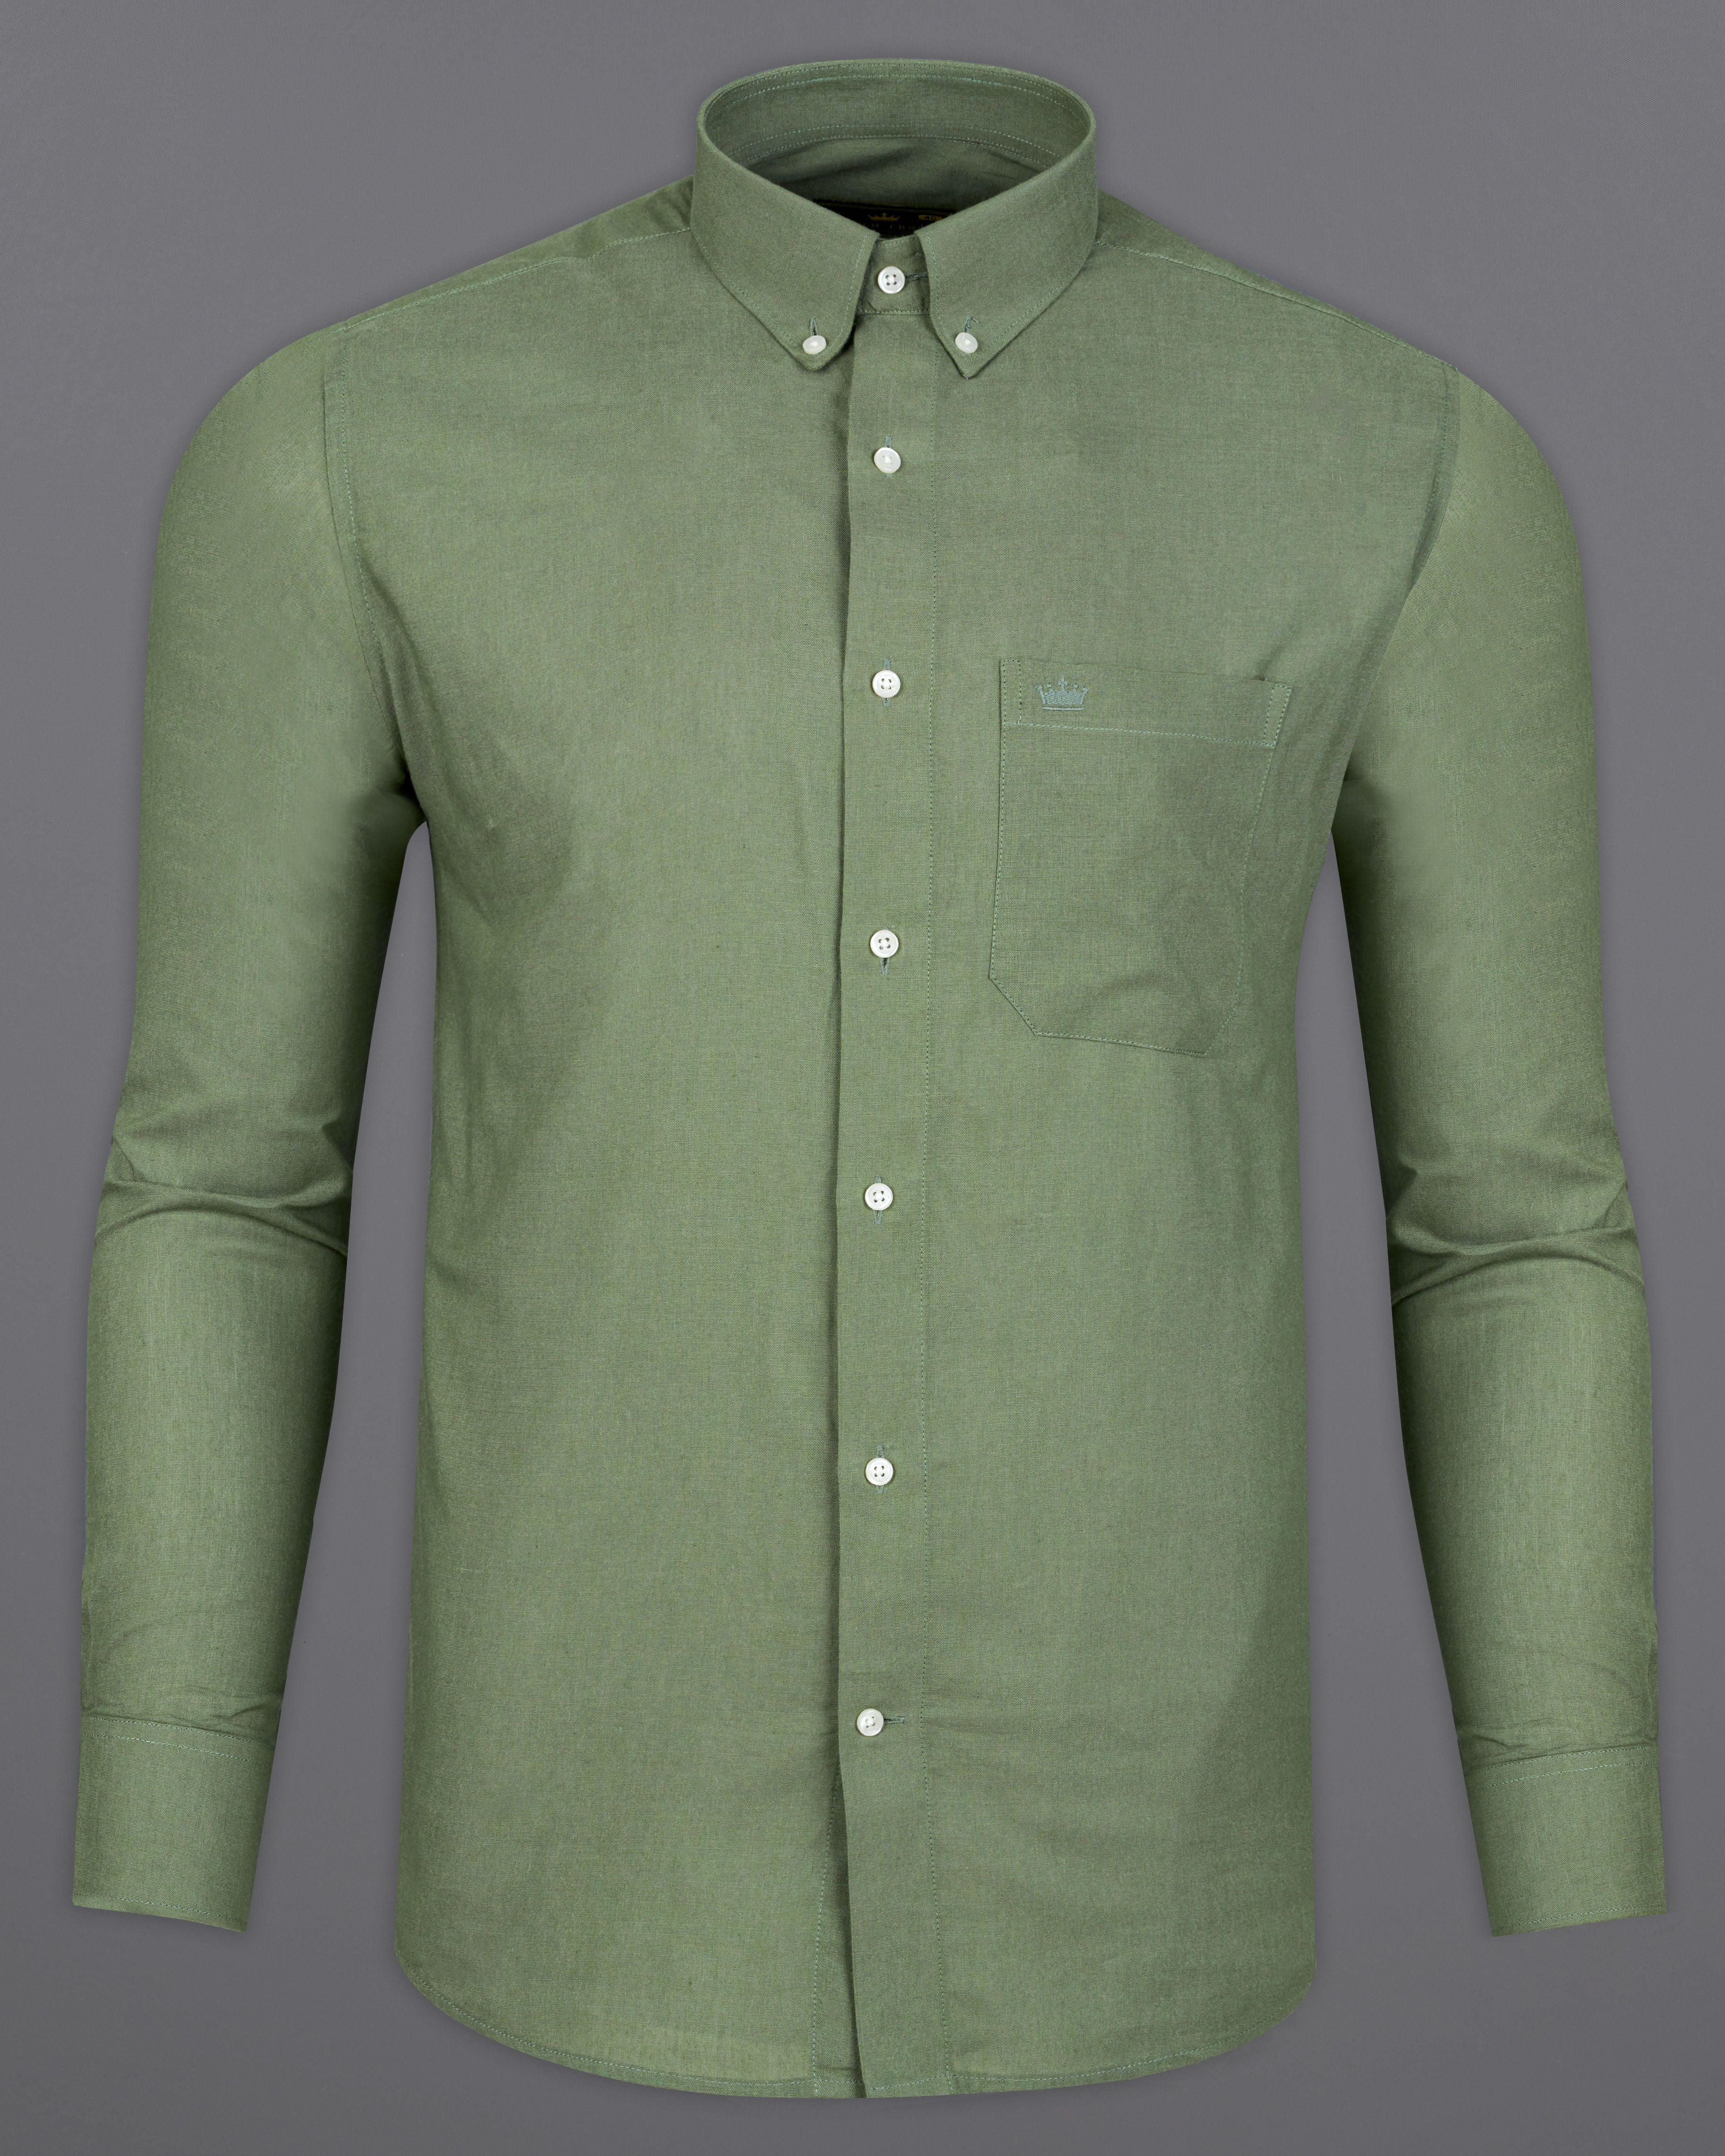 Camouflage Green Royal Oxford Button-Down Shirt 9595-BD-38,9595-BD-H-38,9595-BD-39,9595-BD-H-39,9595-BD-40,9595-BD-H-40,9595-BD-42,9595-BD-H-42,9595-BD-44,9595-BD-H-44,9595-BD-46,9595-BD-H-46,9595-BD-48,9595-BD-H-48,9595-BD-50,9595-BD-H-50,9595-BD-52,9595-BD-H-52